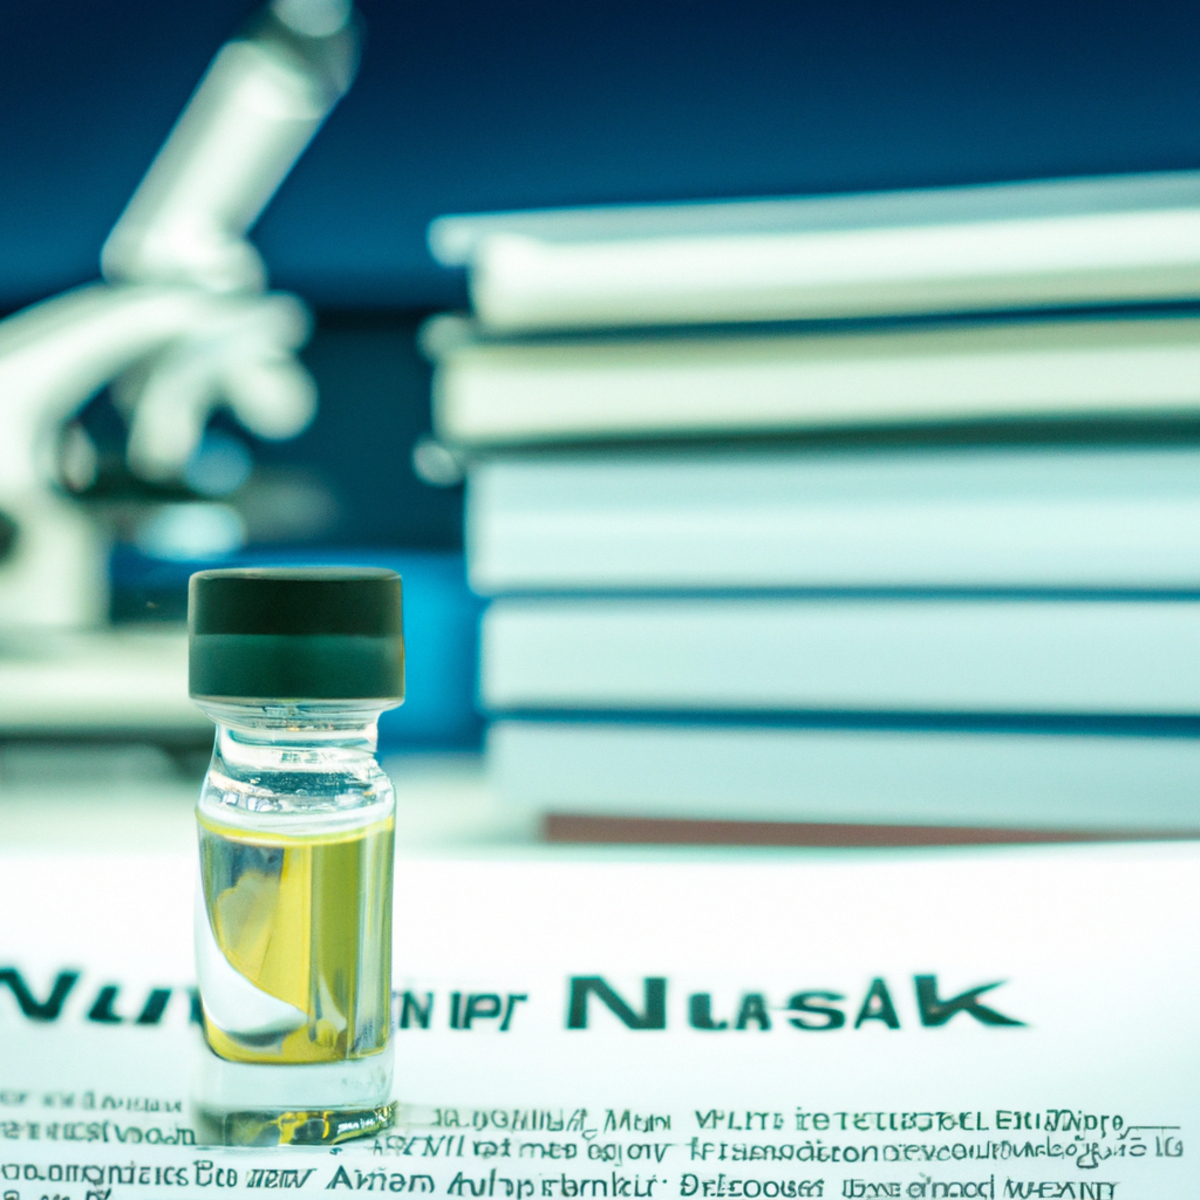 Close-up of glass vial with clear liquid, surrounded by research papers and microscope, symbolizing Niemann-Pick Disease research.